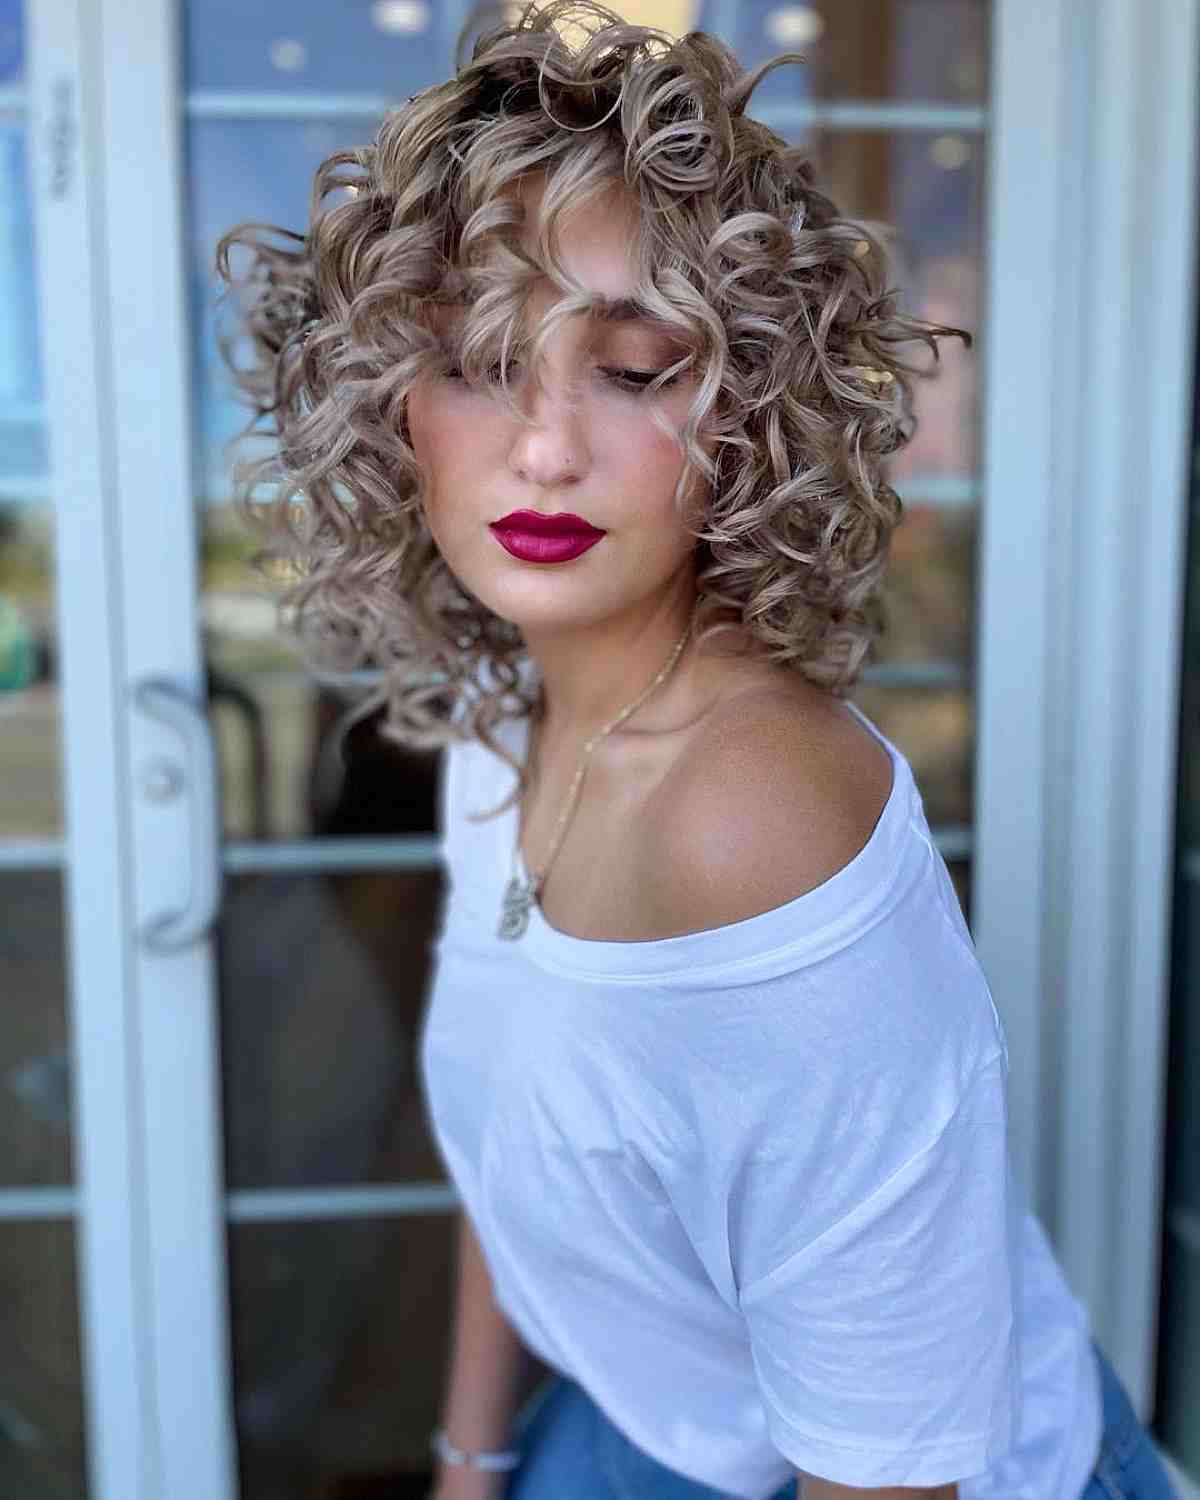 80s-Inspired Natural Curls with Bangs